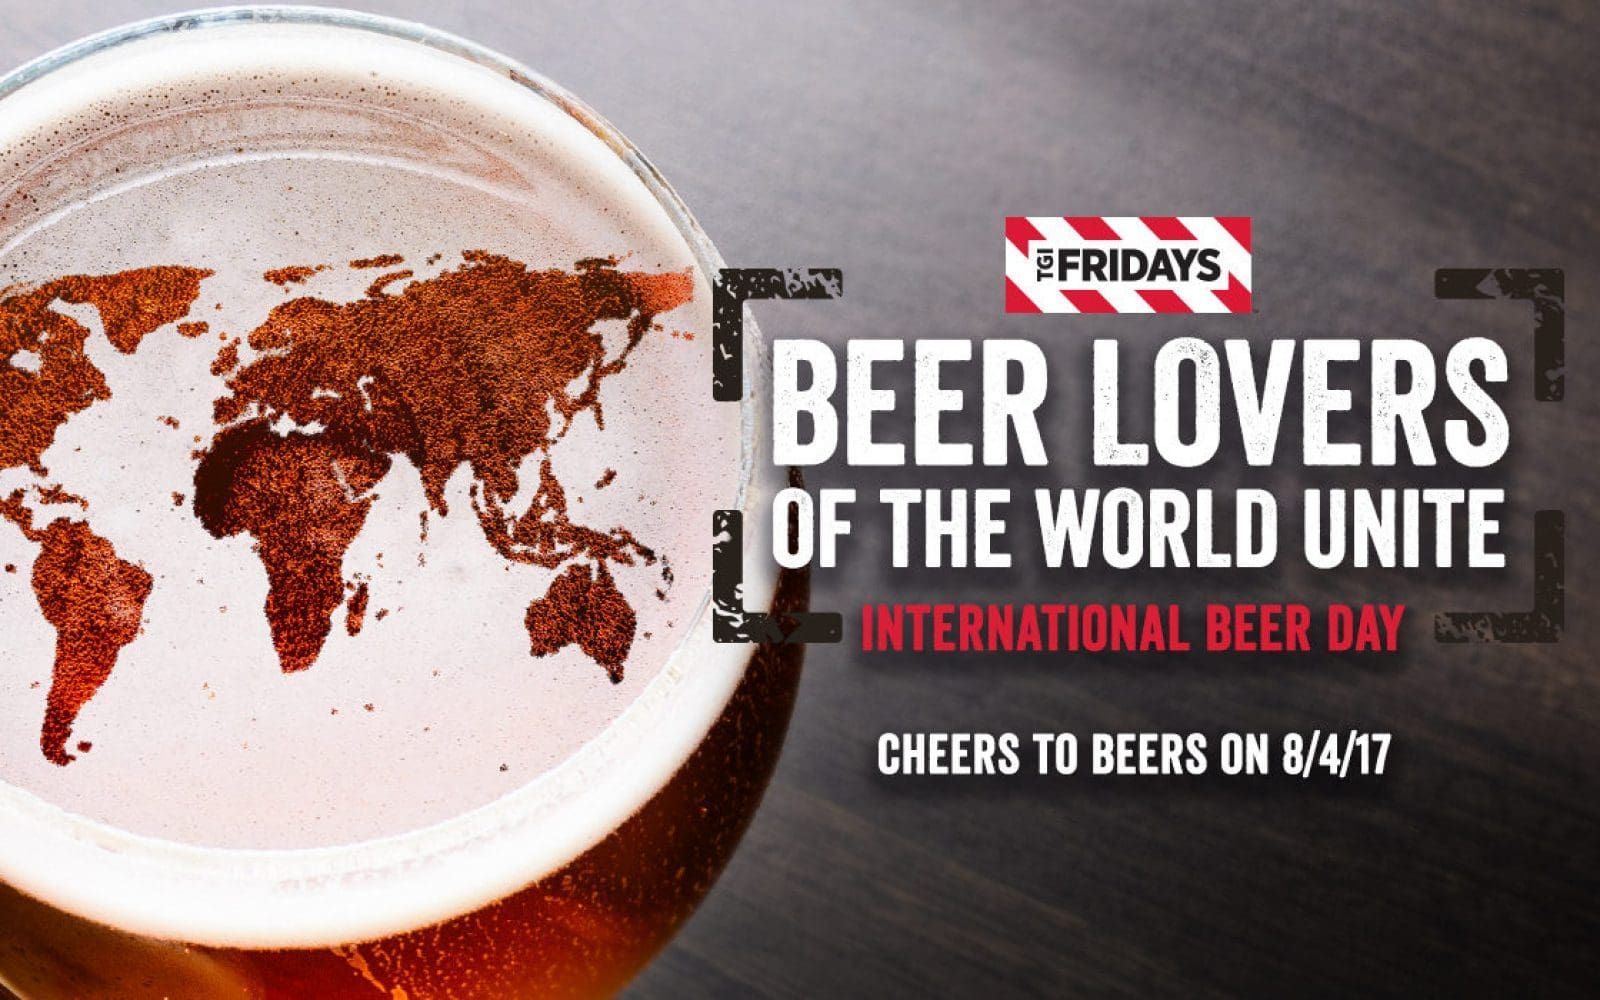 TGIFridays Gears Up for International Beer Day | Agency Creative